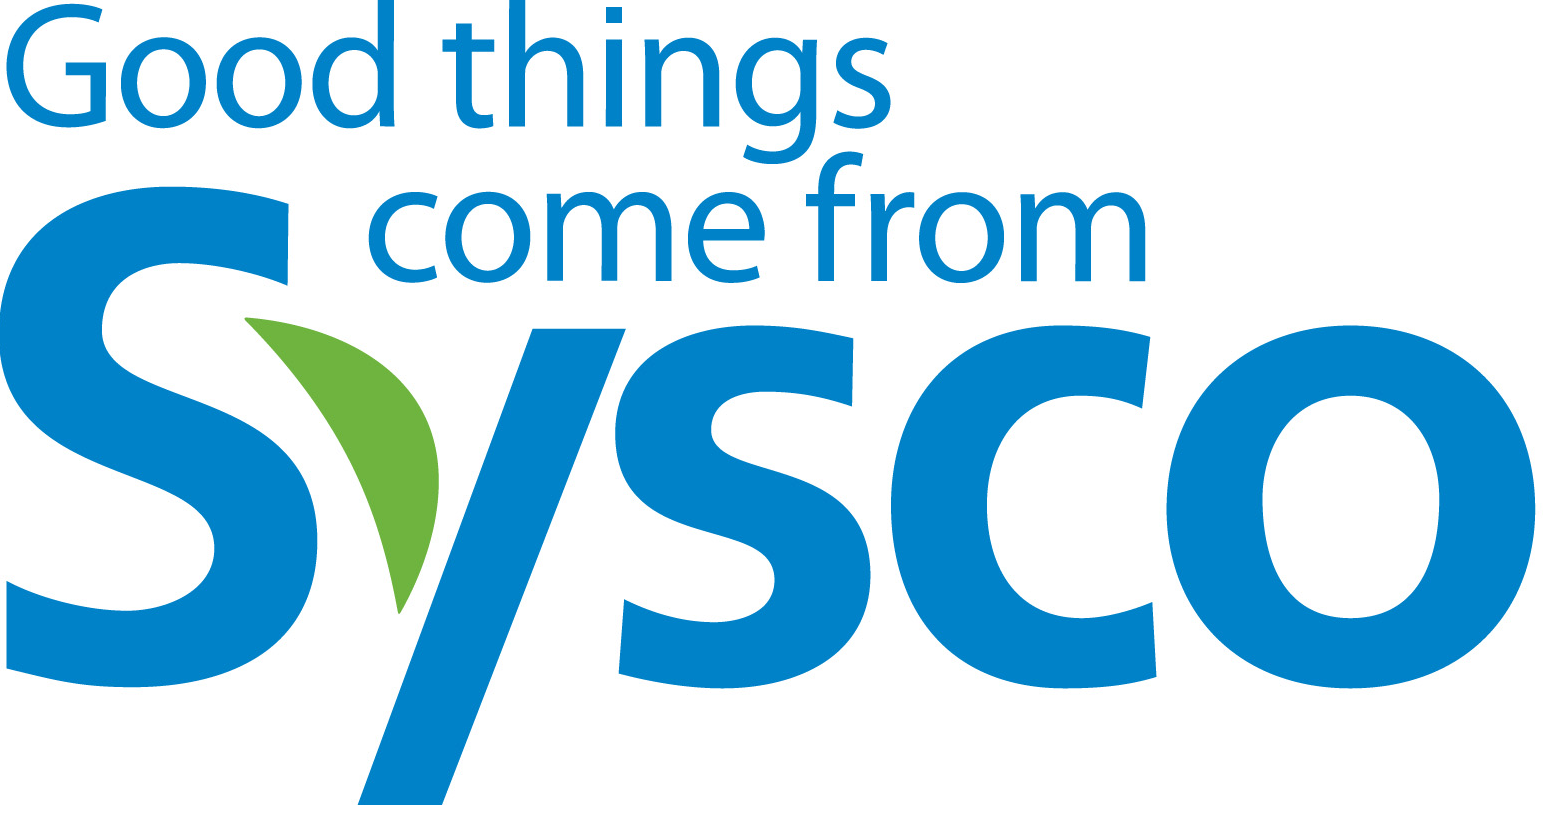 Sysco.png